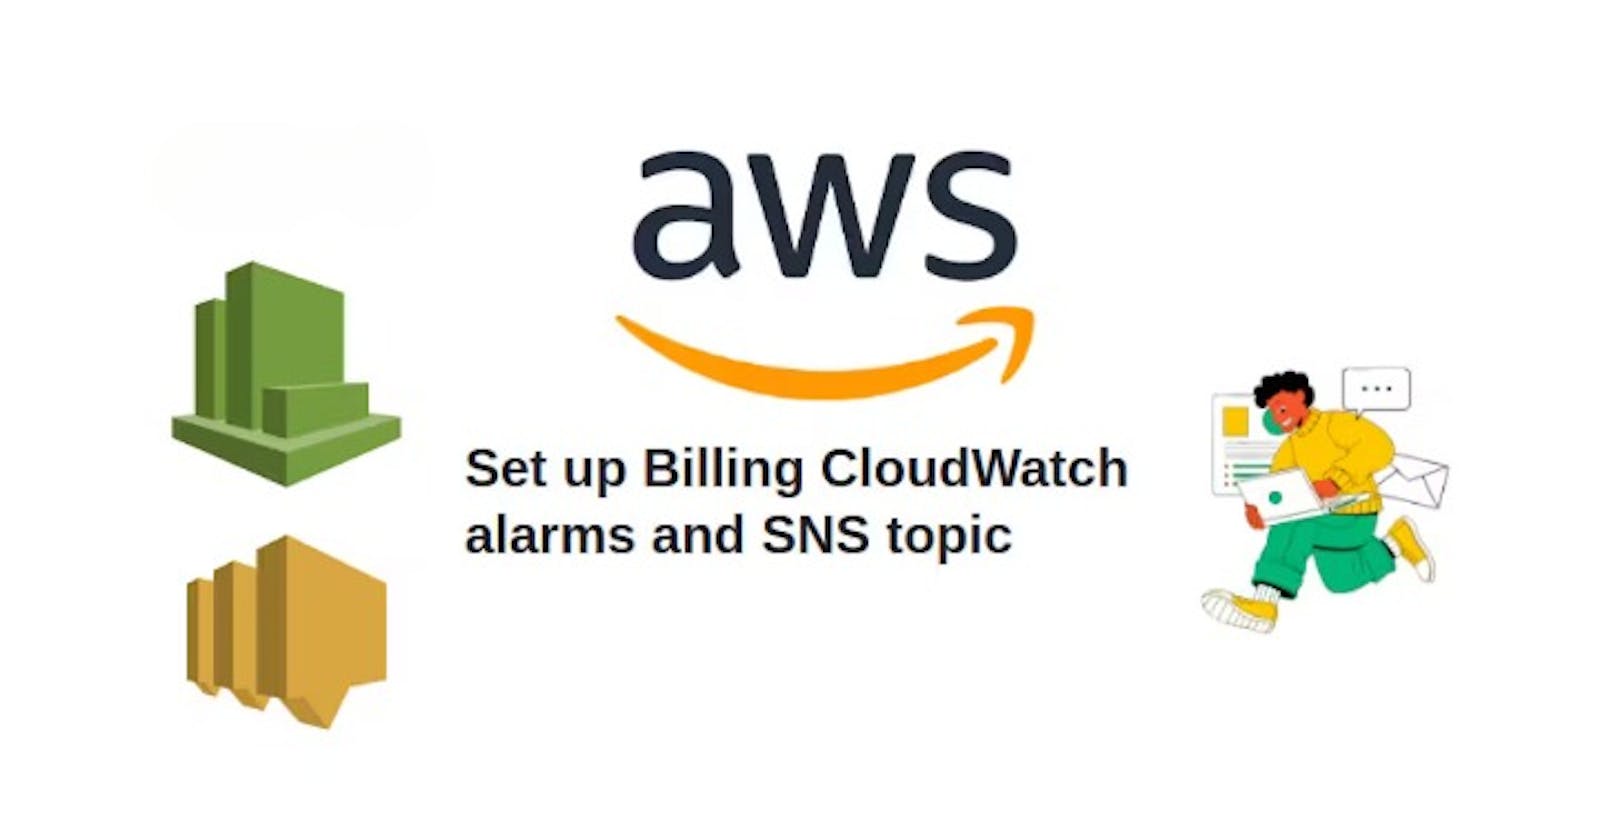 Set up CloudWatch alarms and SNS topic in AWS